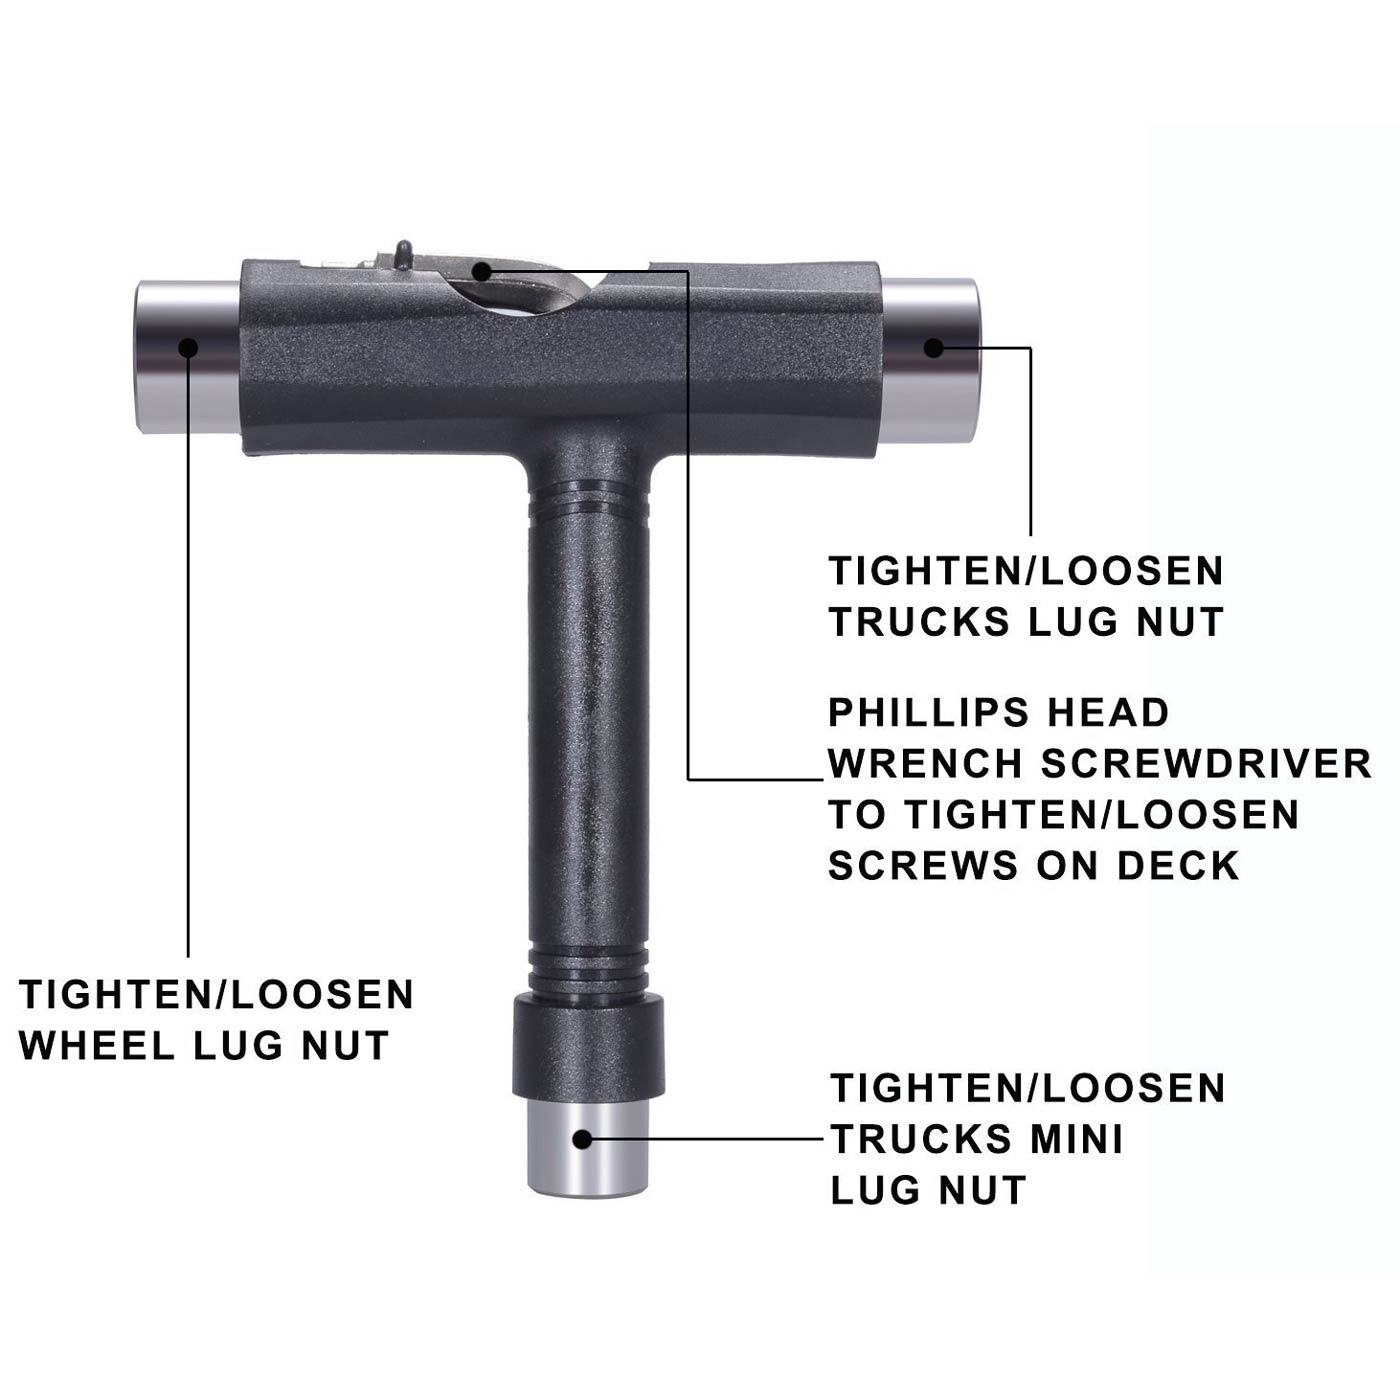 T Tool All in One Skate Tool for Longboards, Details about   RADECKAL Compact Pocket Skate Tool 